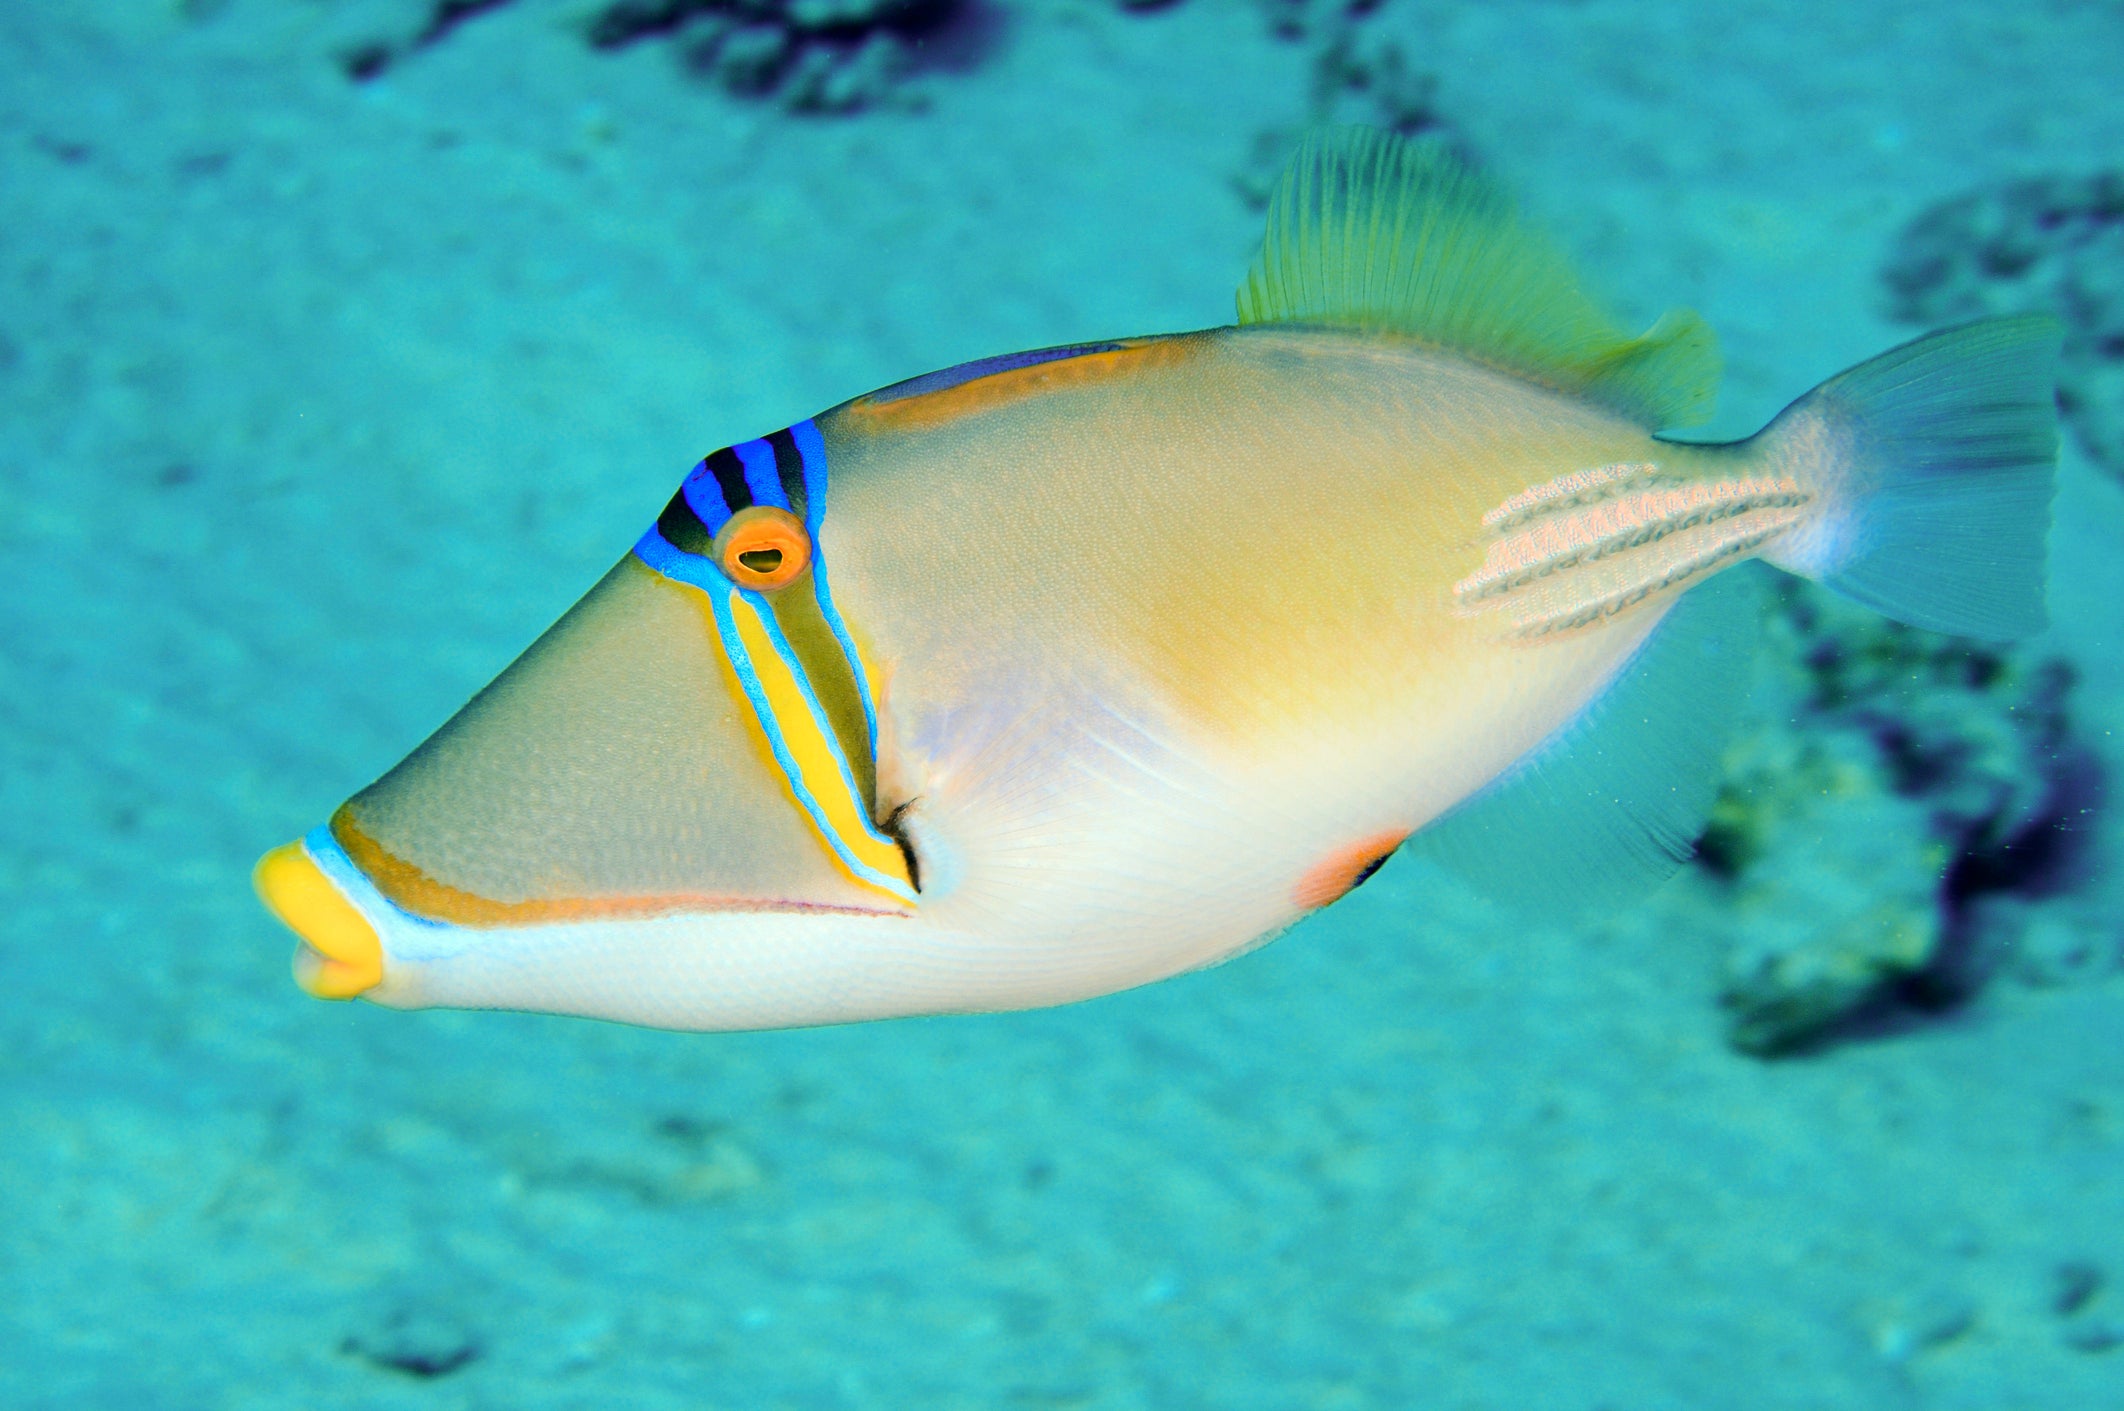 Spot exotic marine life including triggerfish on a dive trip in the Gulf of Guinea